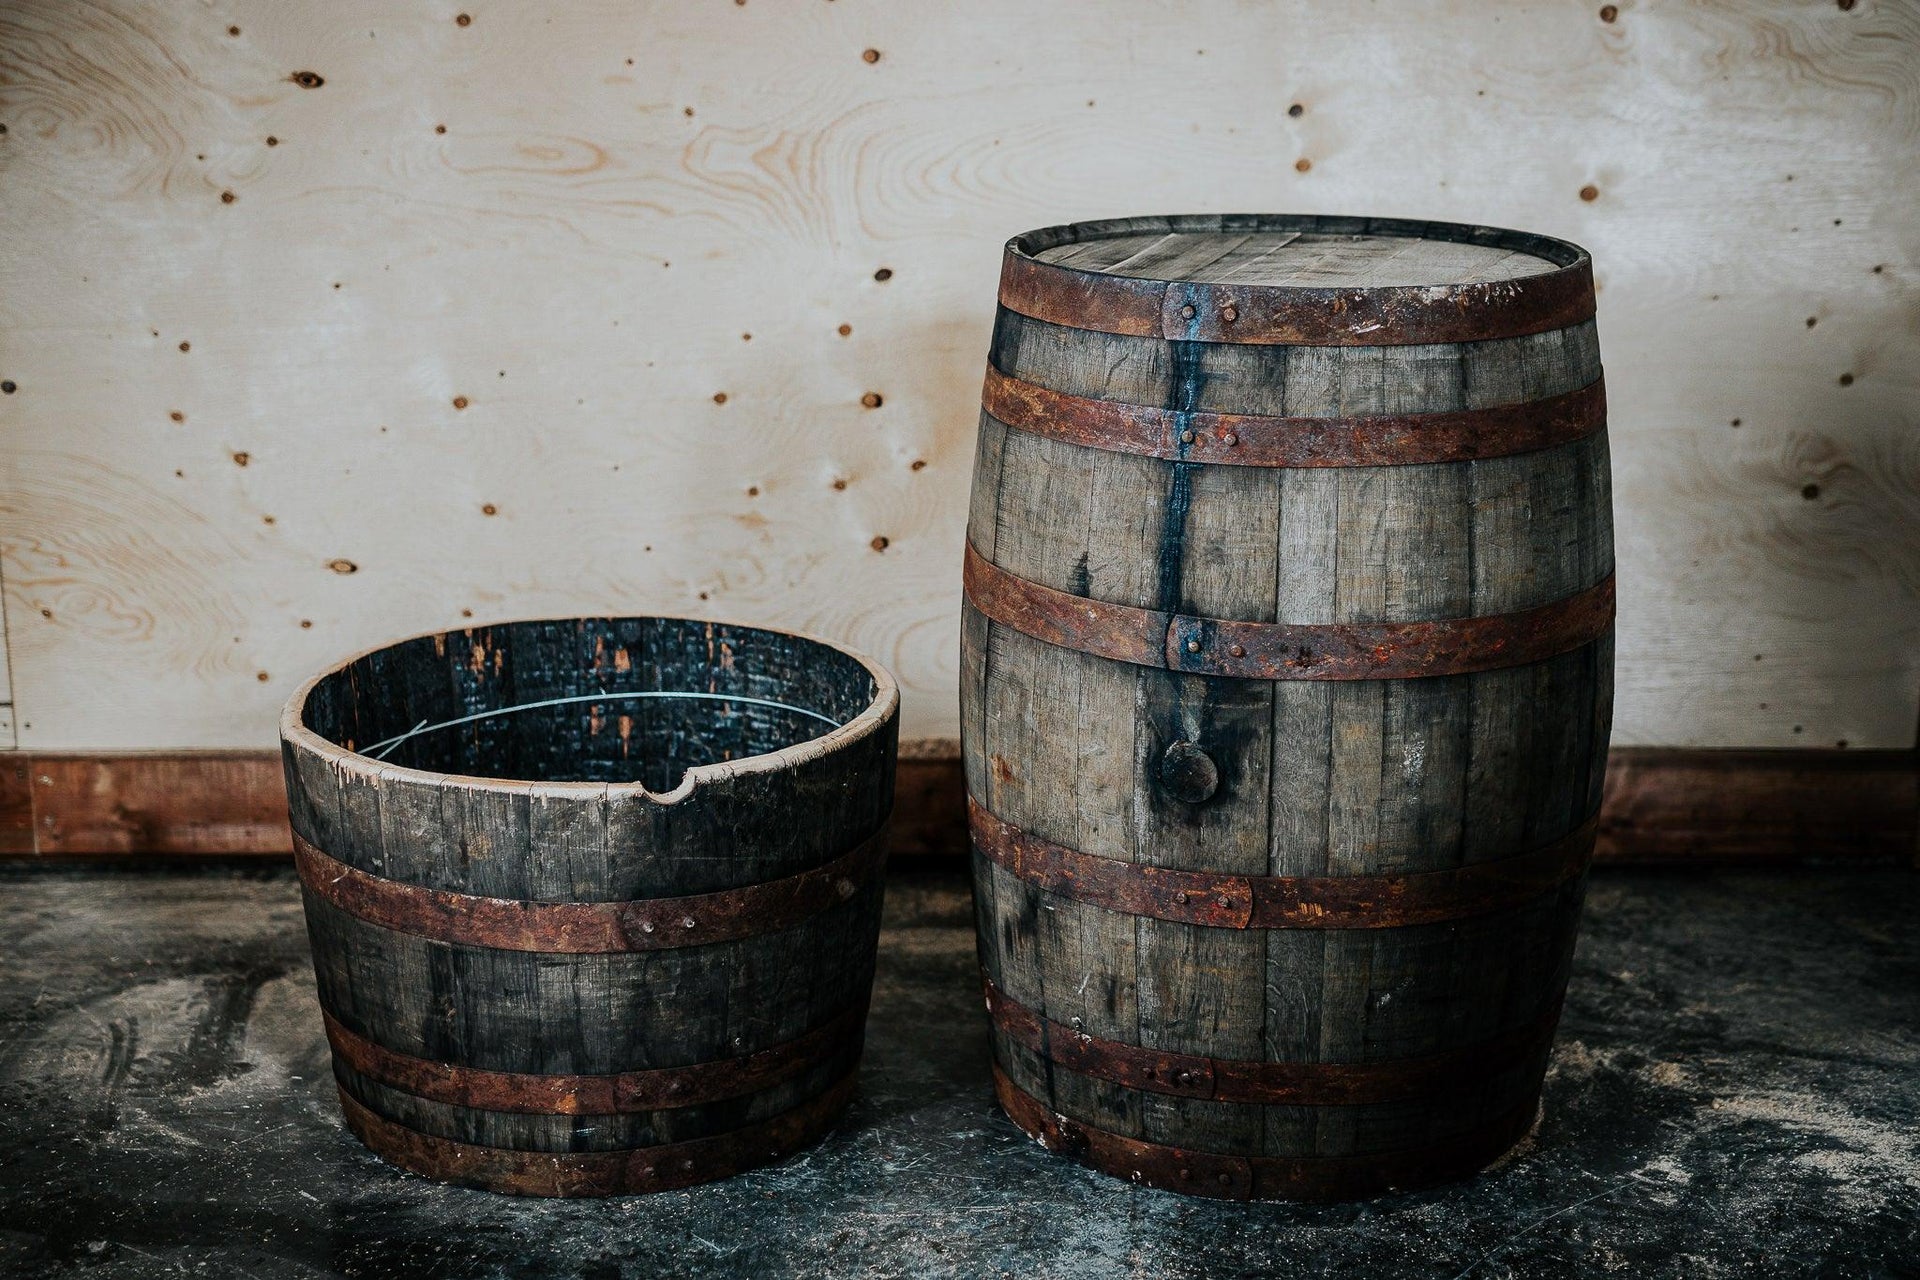 Canadian Whiskey Barrel Planter - The County Cooperage